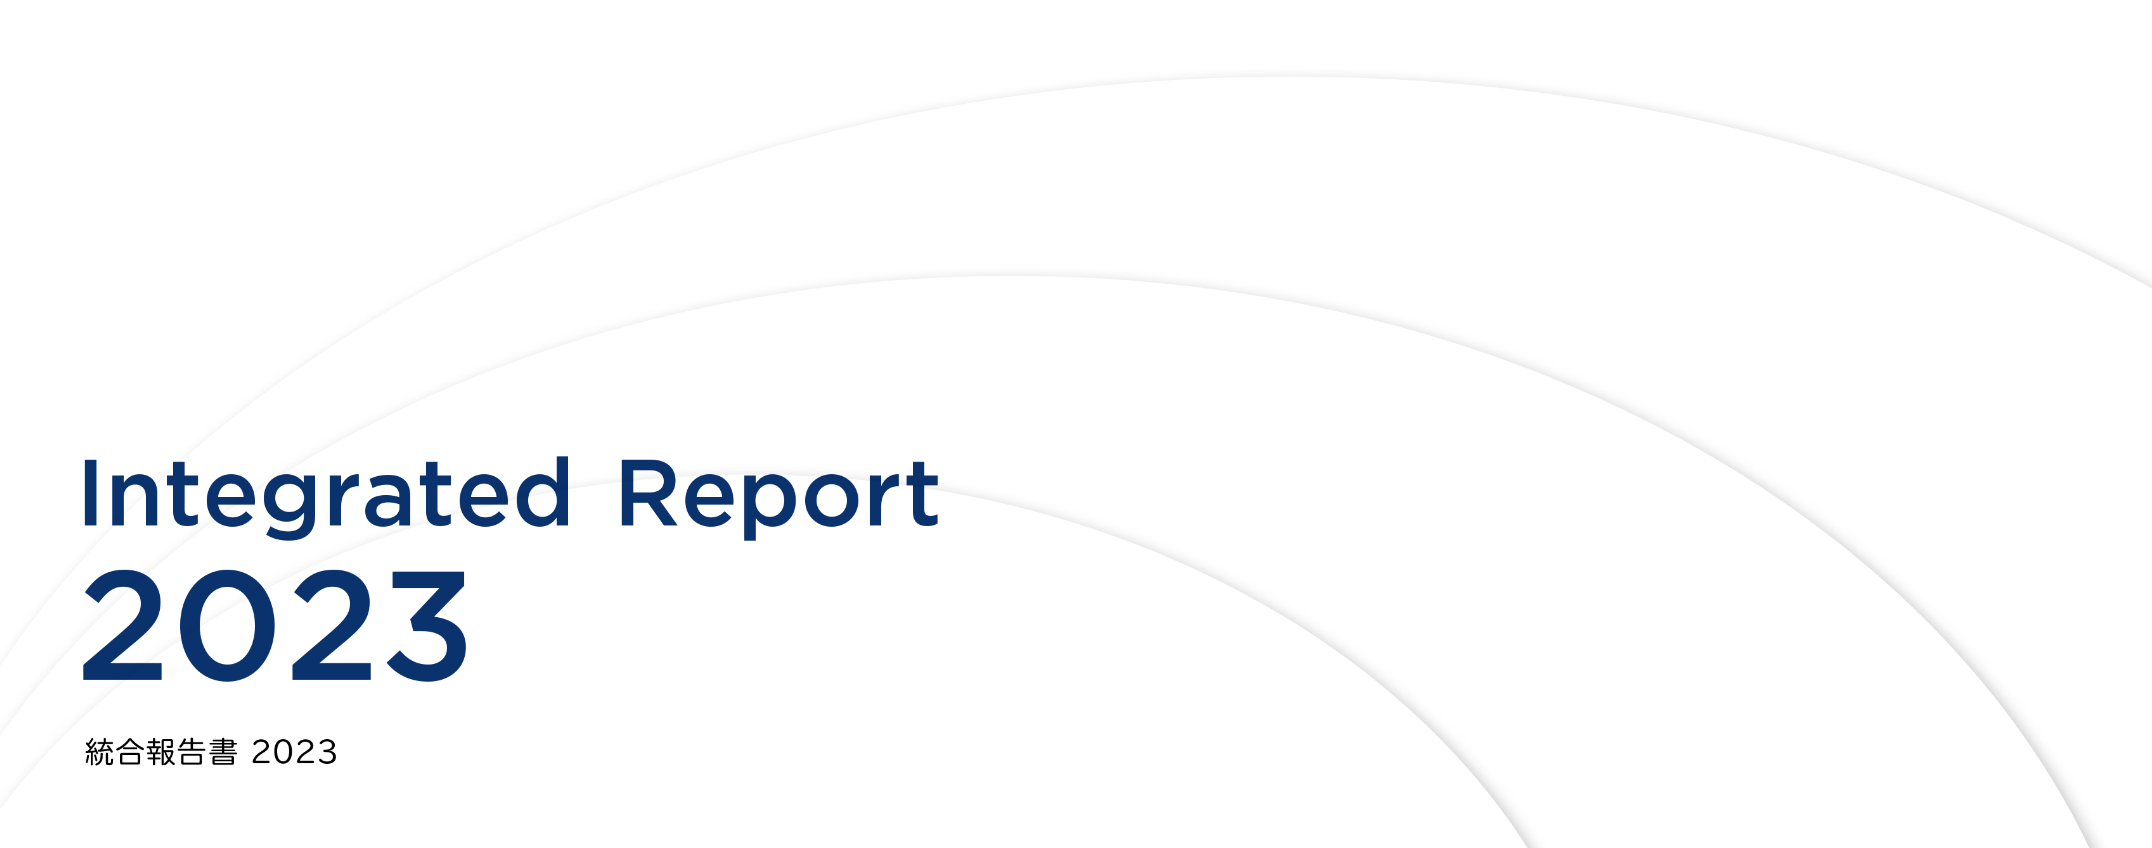 Integrated Report2022